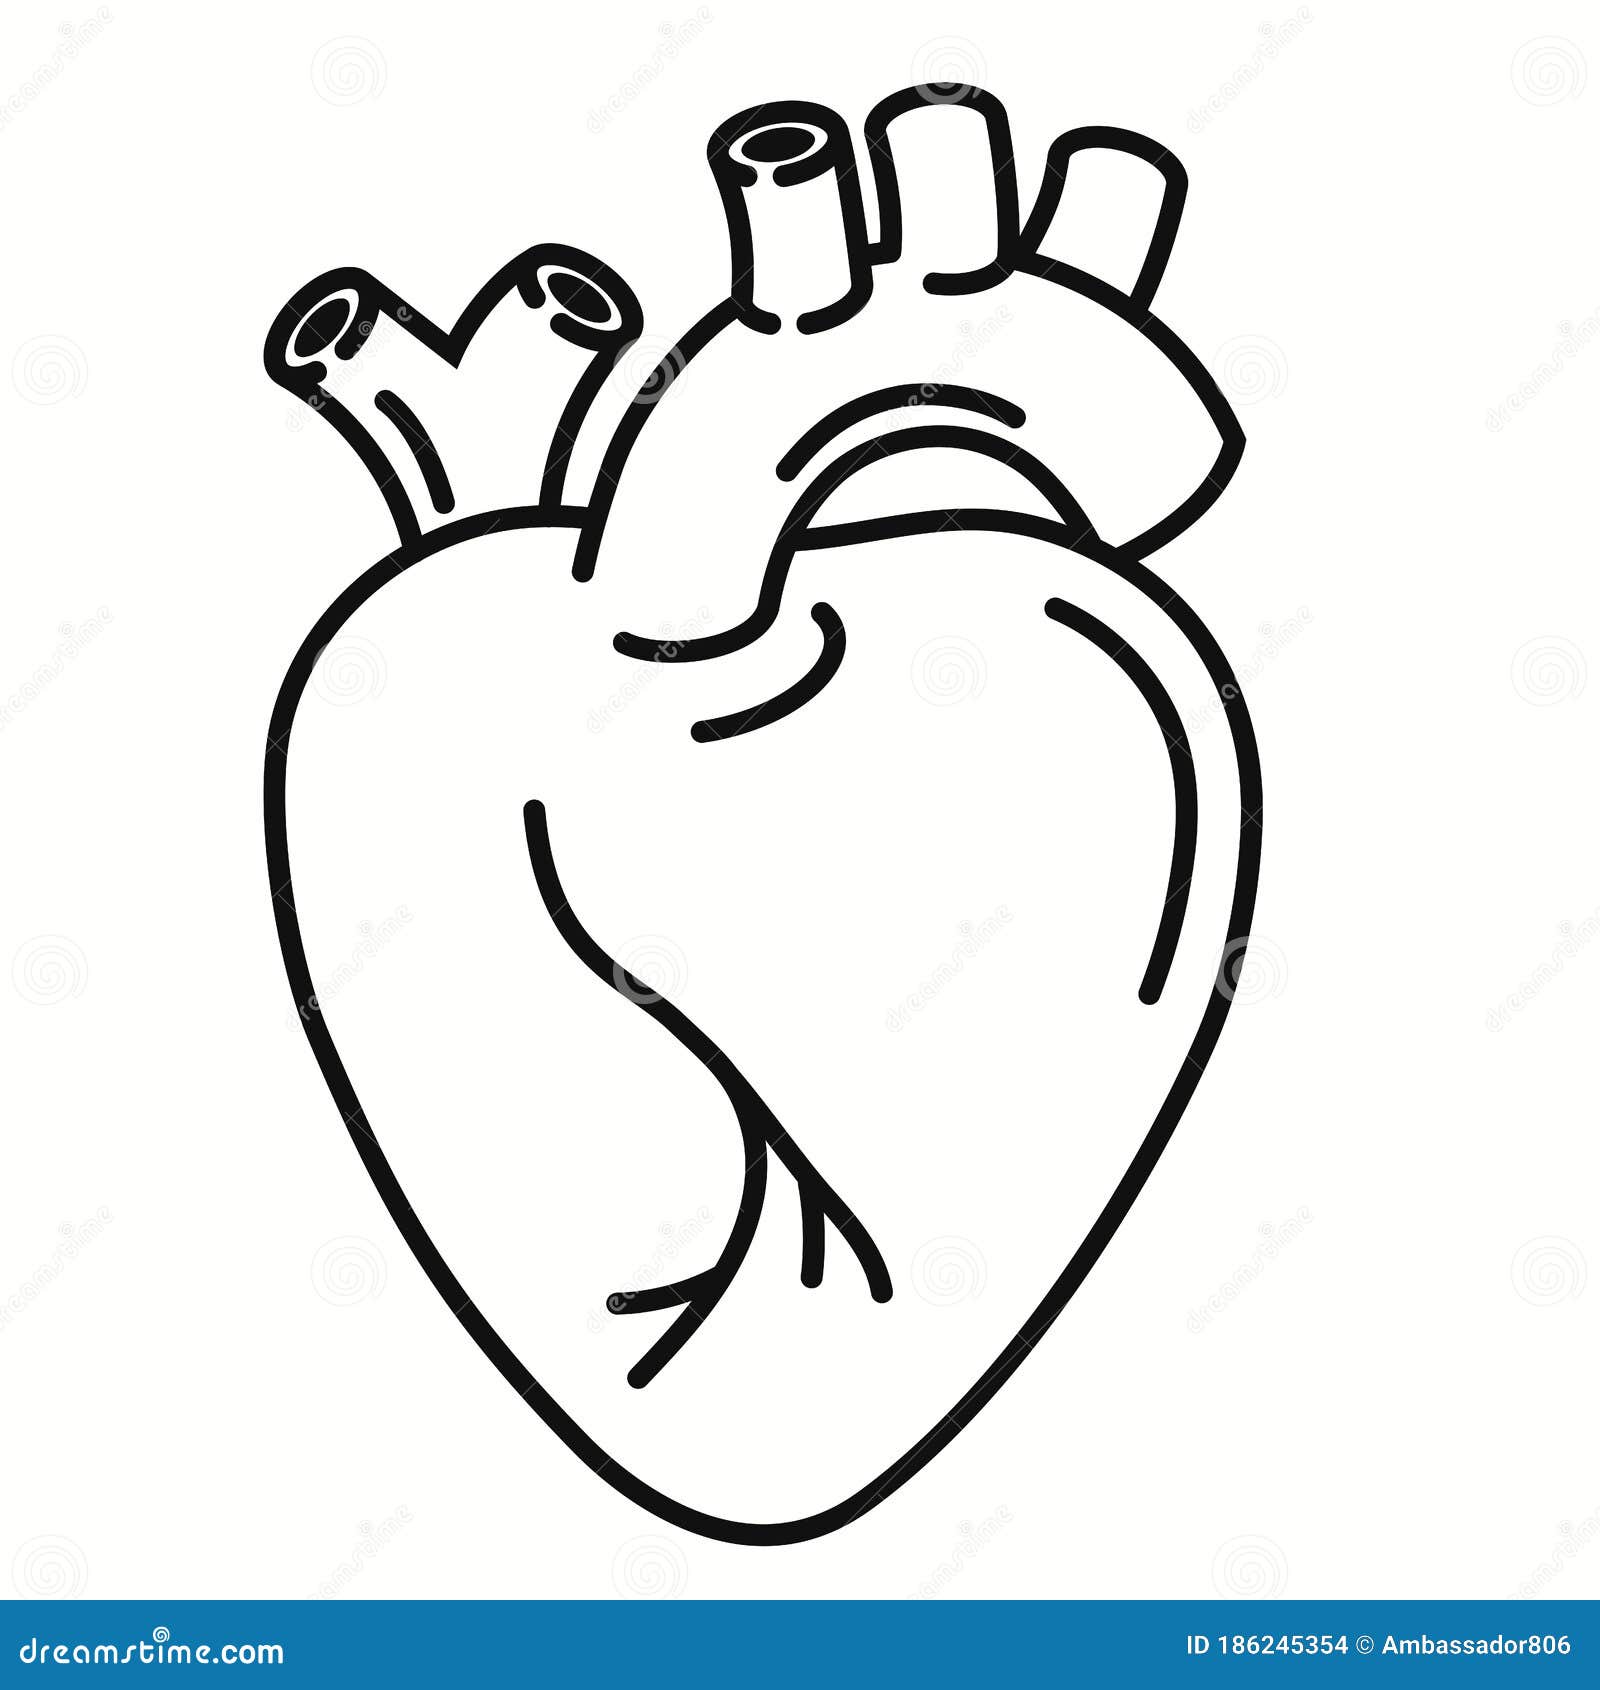 File:Heart-SG2001-transparent.png - Wikipedia